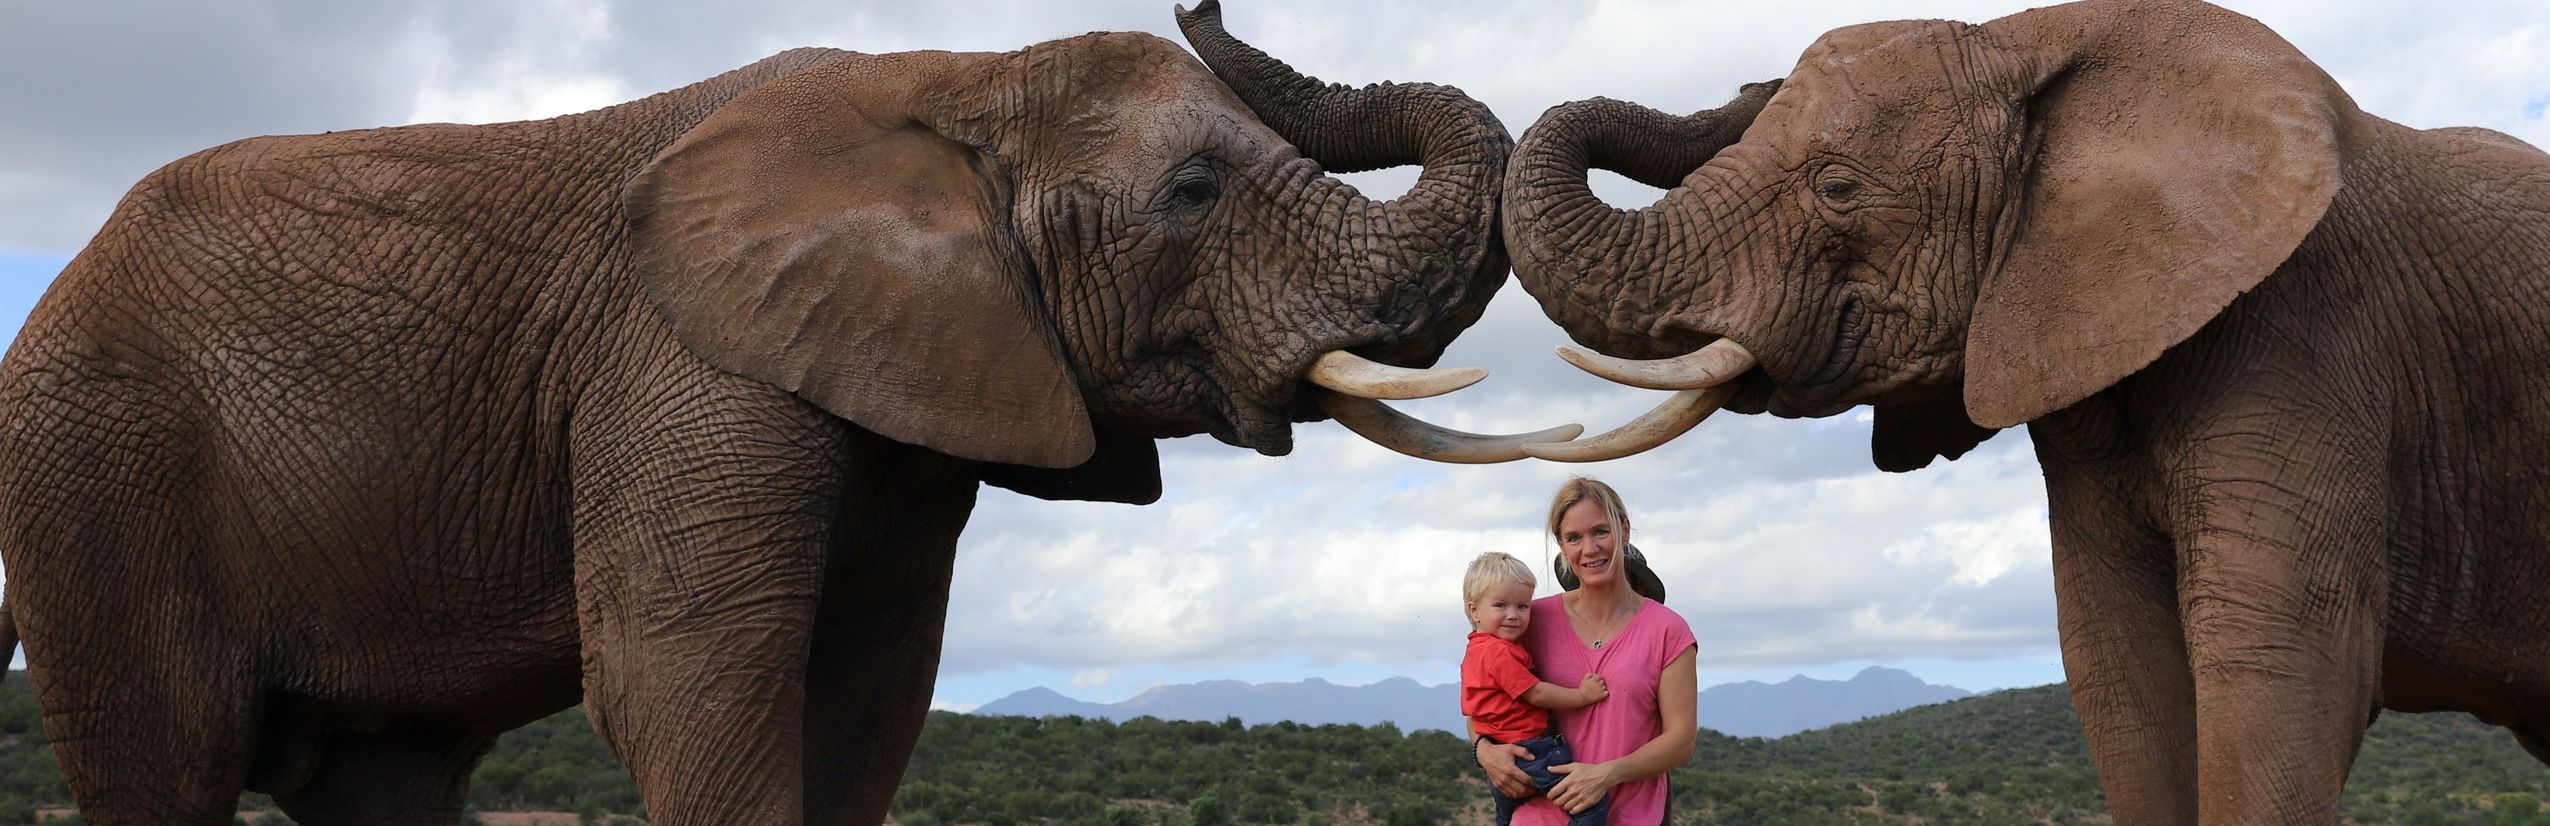 Garden Route mit Kindern individuell - Garden Route for family individuell - Familiensafari plus